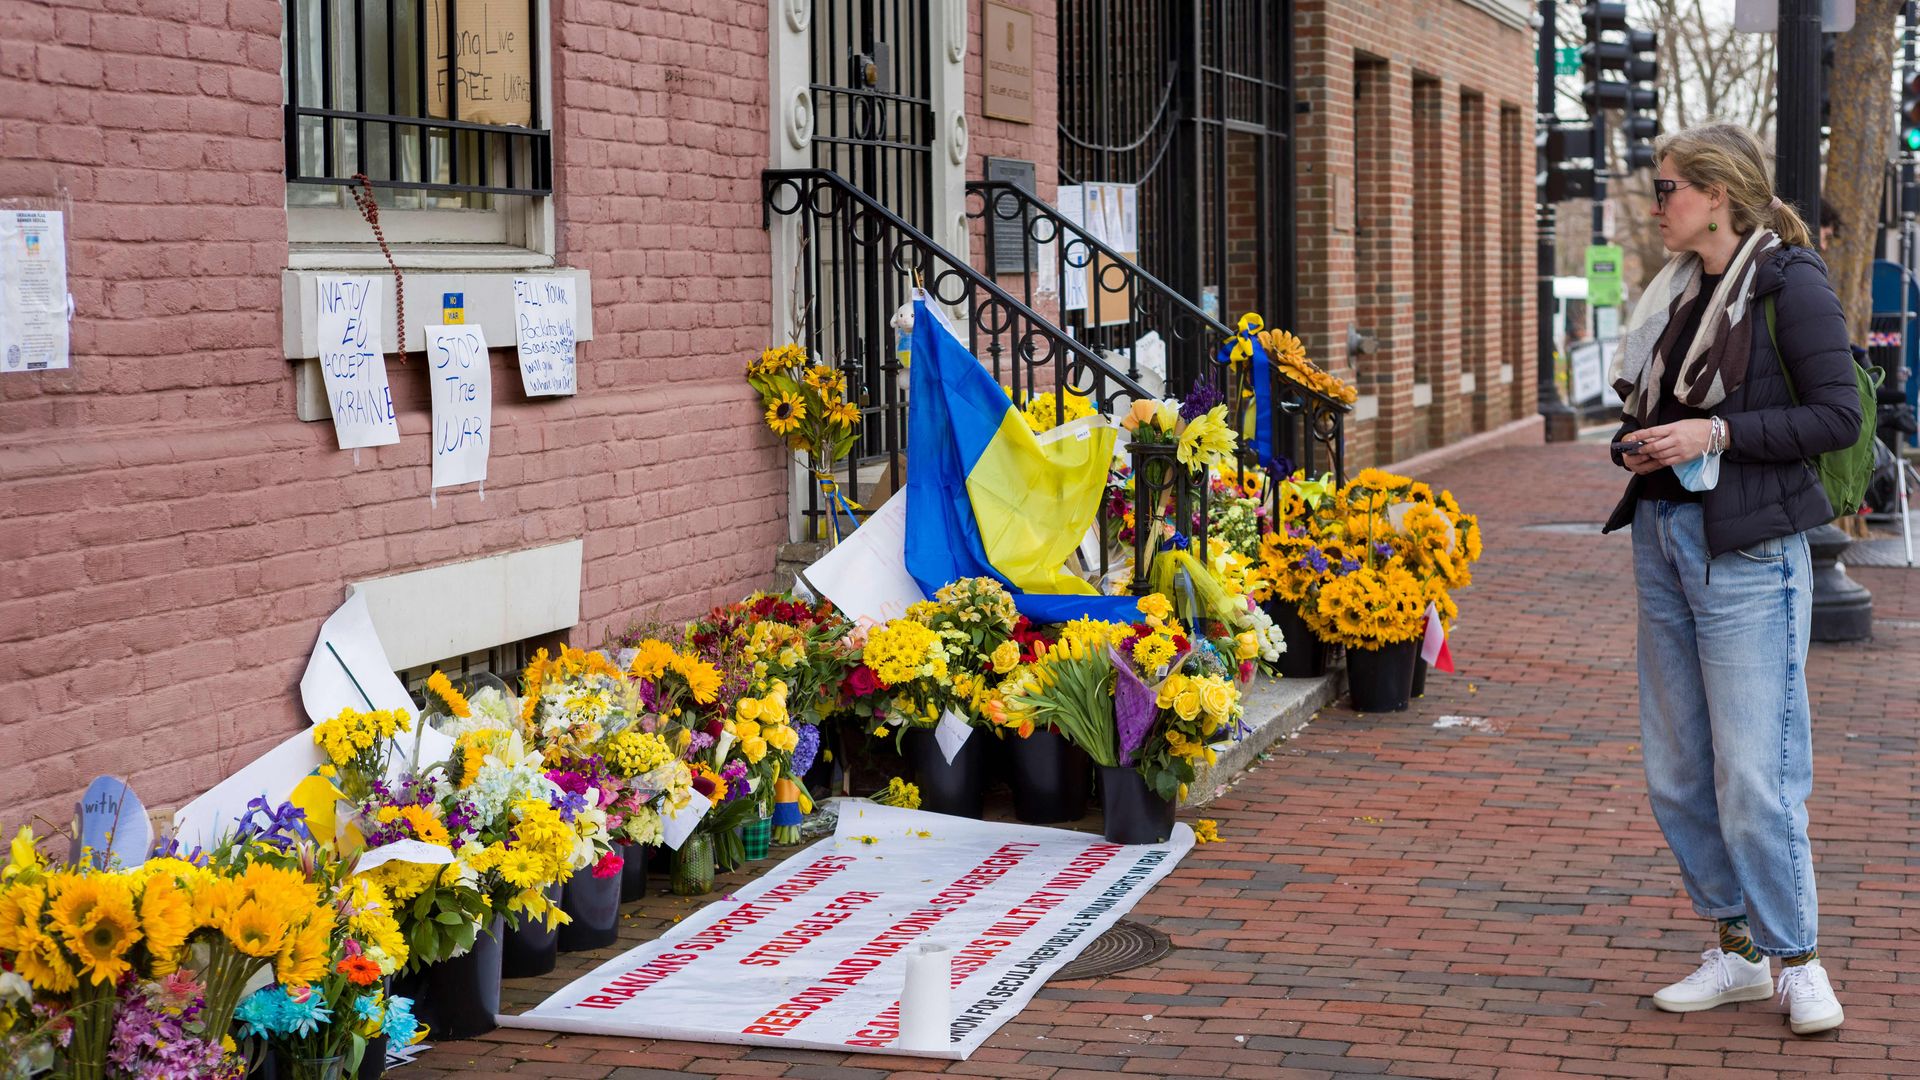 A woman is seen looking at flowers and other mementos left outside the Ukrainian embassy in Washington.